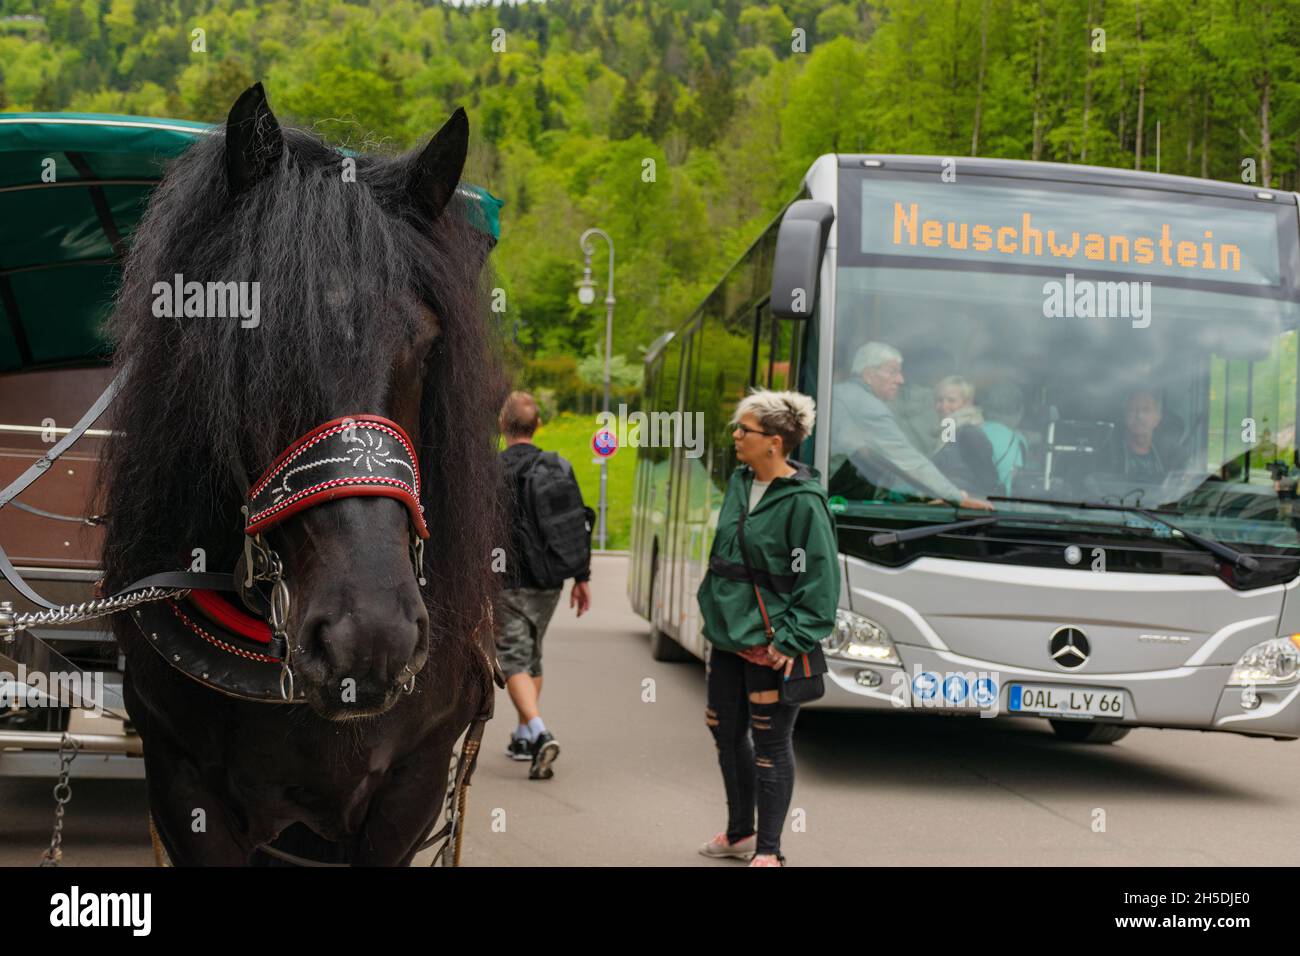 26 May 2019 Fussen, Germany - horse carriages waiting for tourists near Neuschwanstein castle and Hohenschwangau castle. Stock Photo